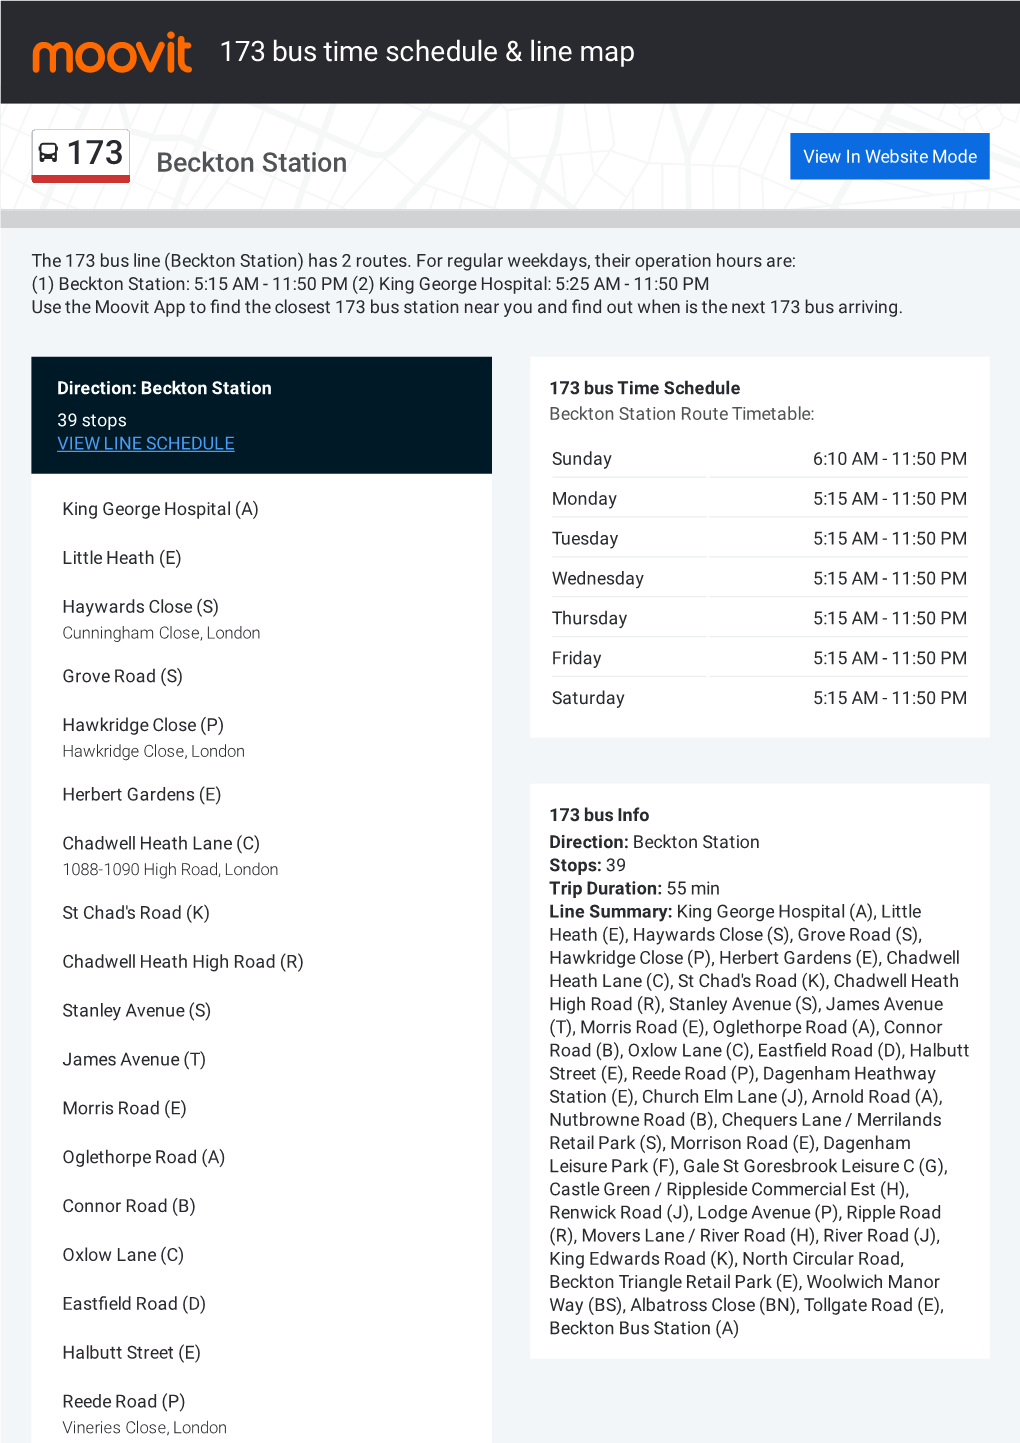 173 Bus Time Schedule & Line Route